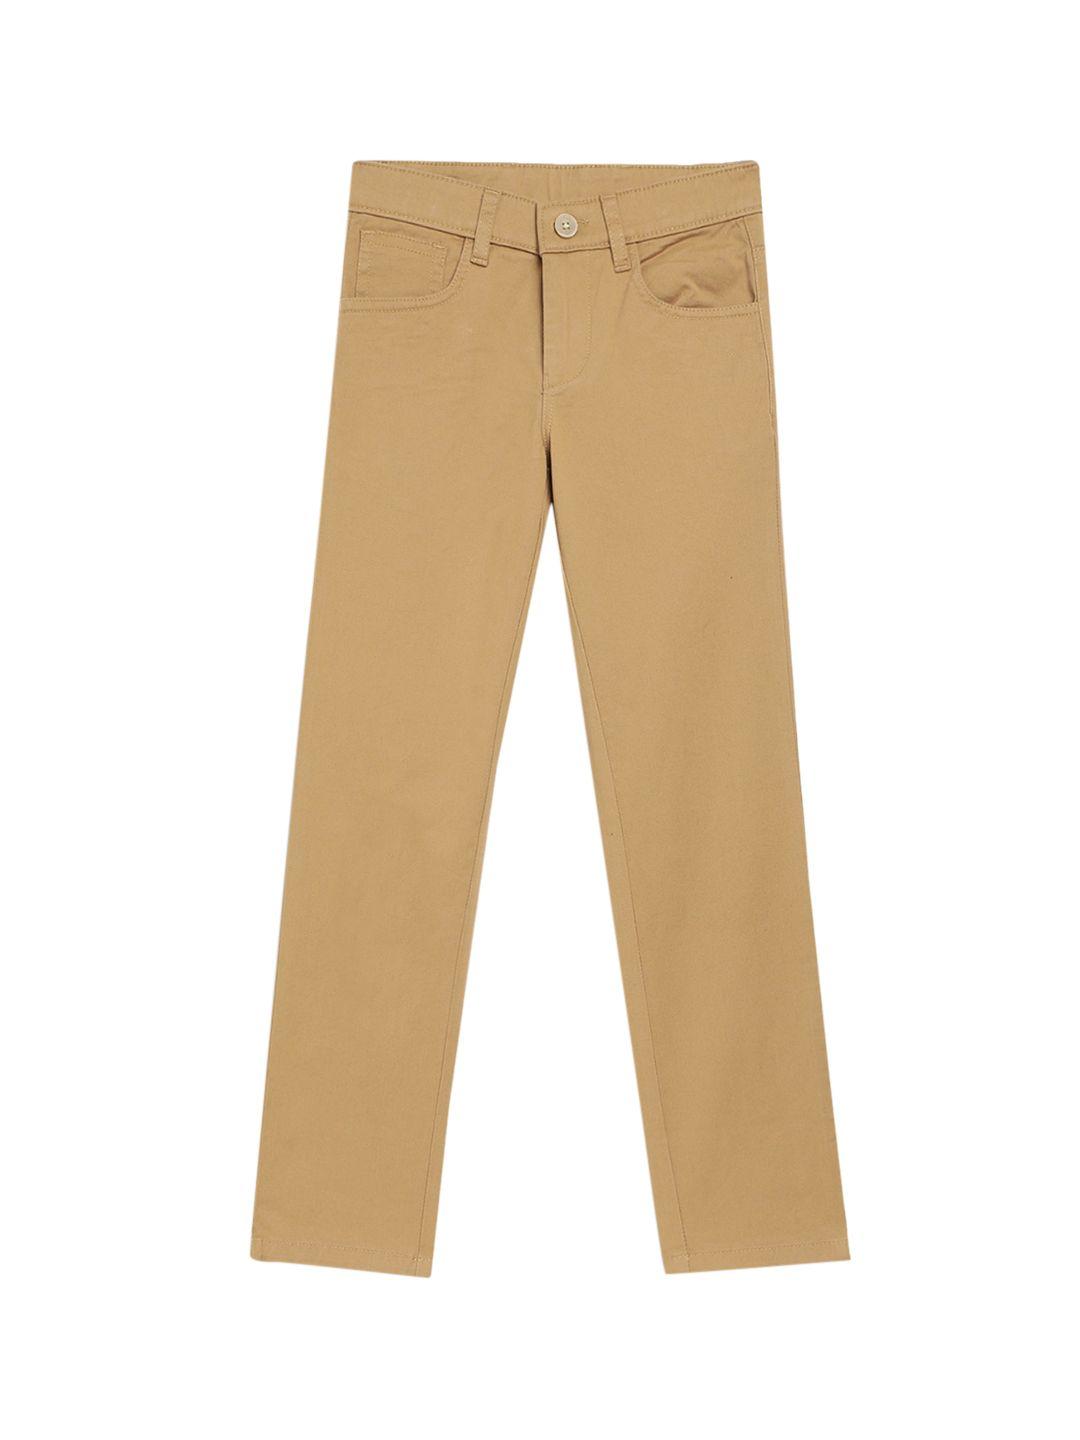 cantabil boys beige chinos trousers